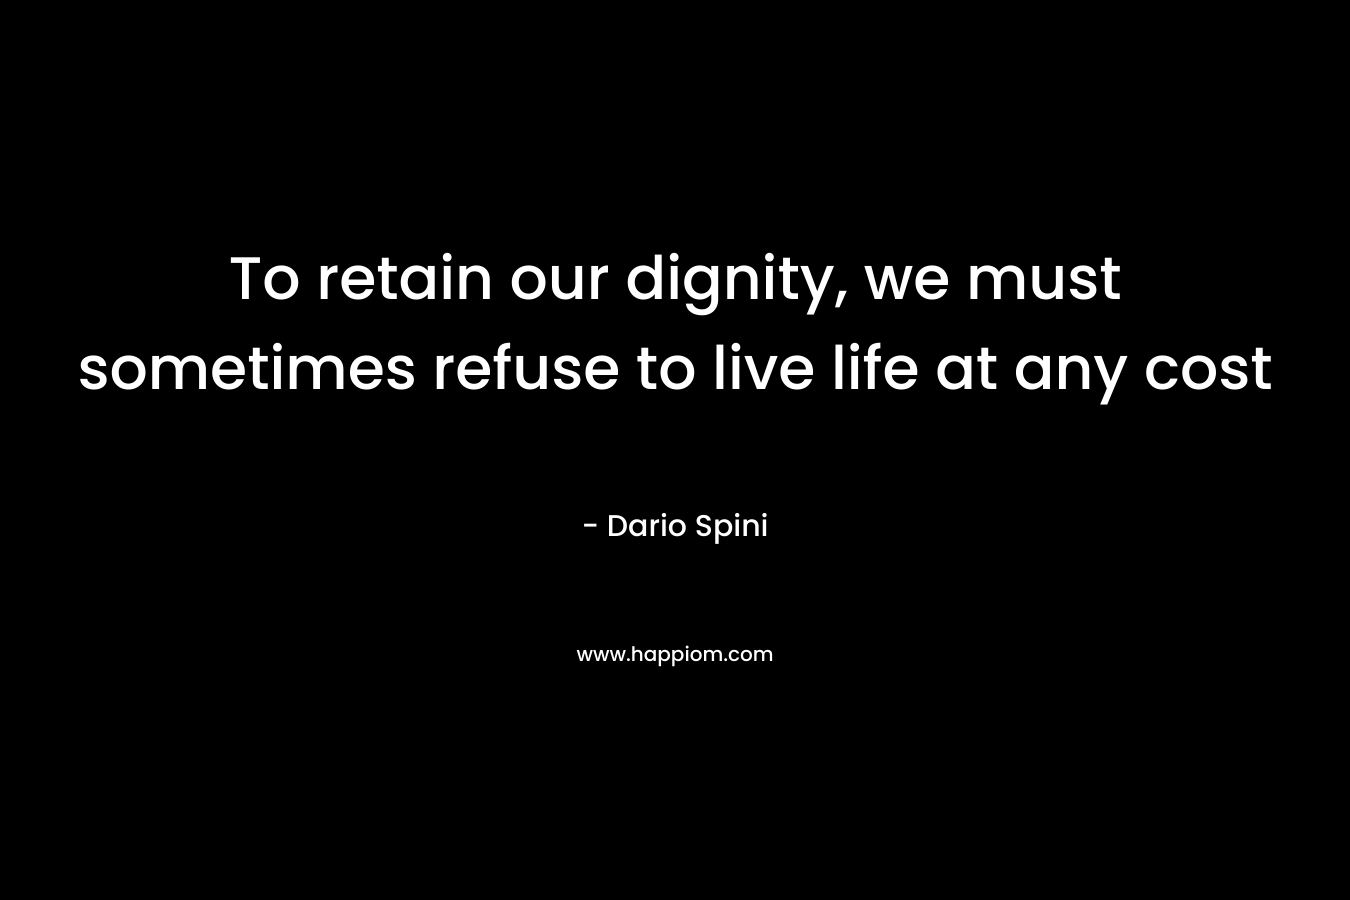 To retain our dignity, we must sometimes refuse to live life at any cost